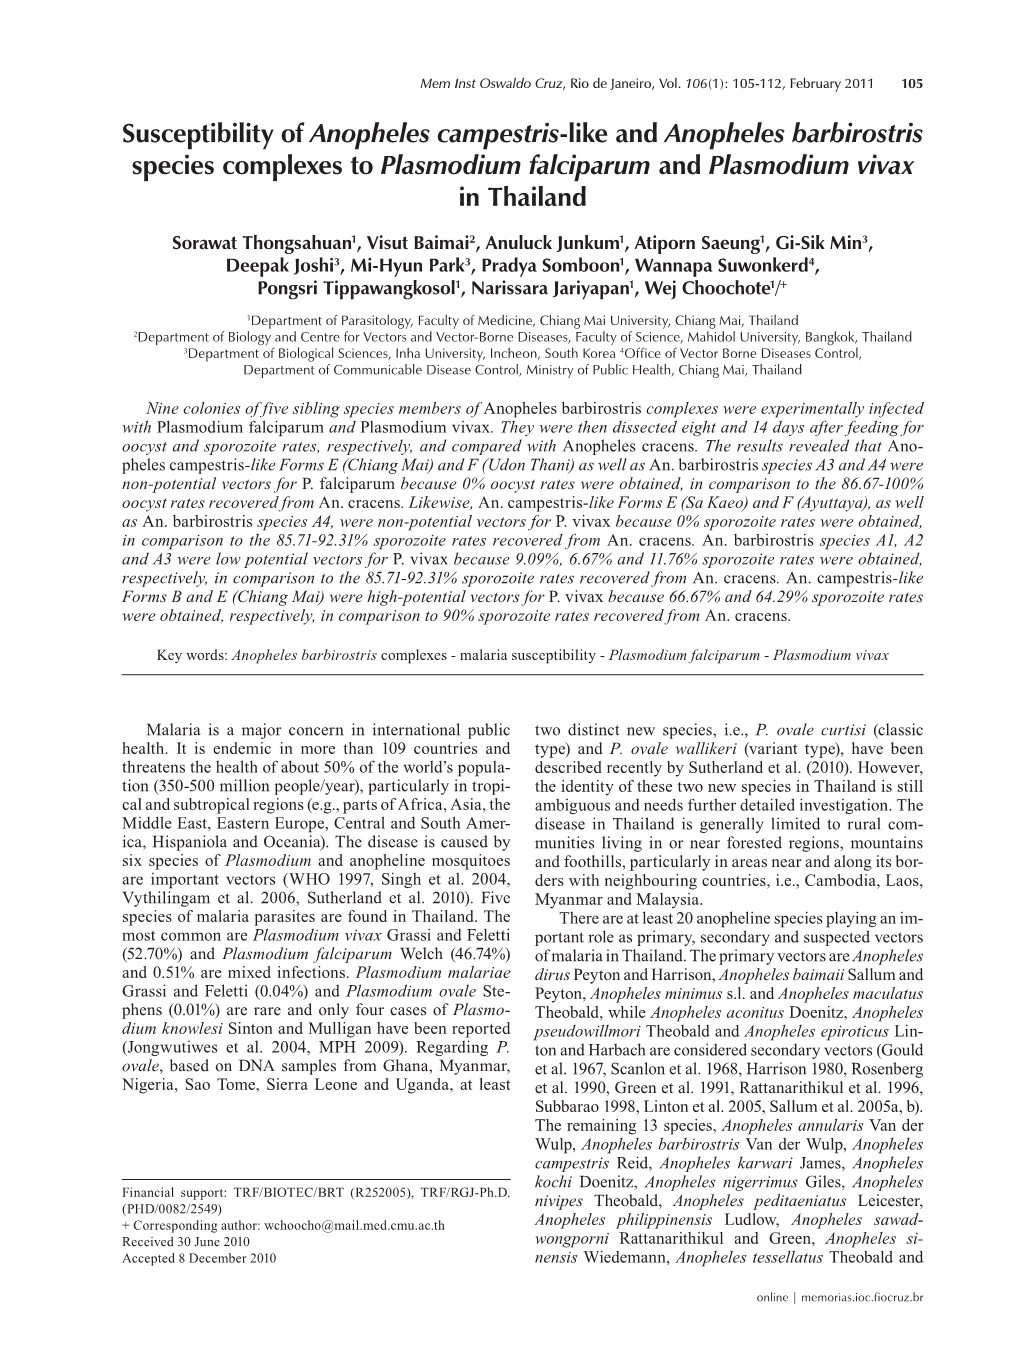 Susceptibility of Anopheles Campestris-Like and Anopheles Barbirostris Species Complexes to Plasmodium Falciparum and Plasmodium Vivax in Thailand